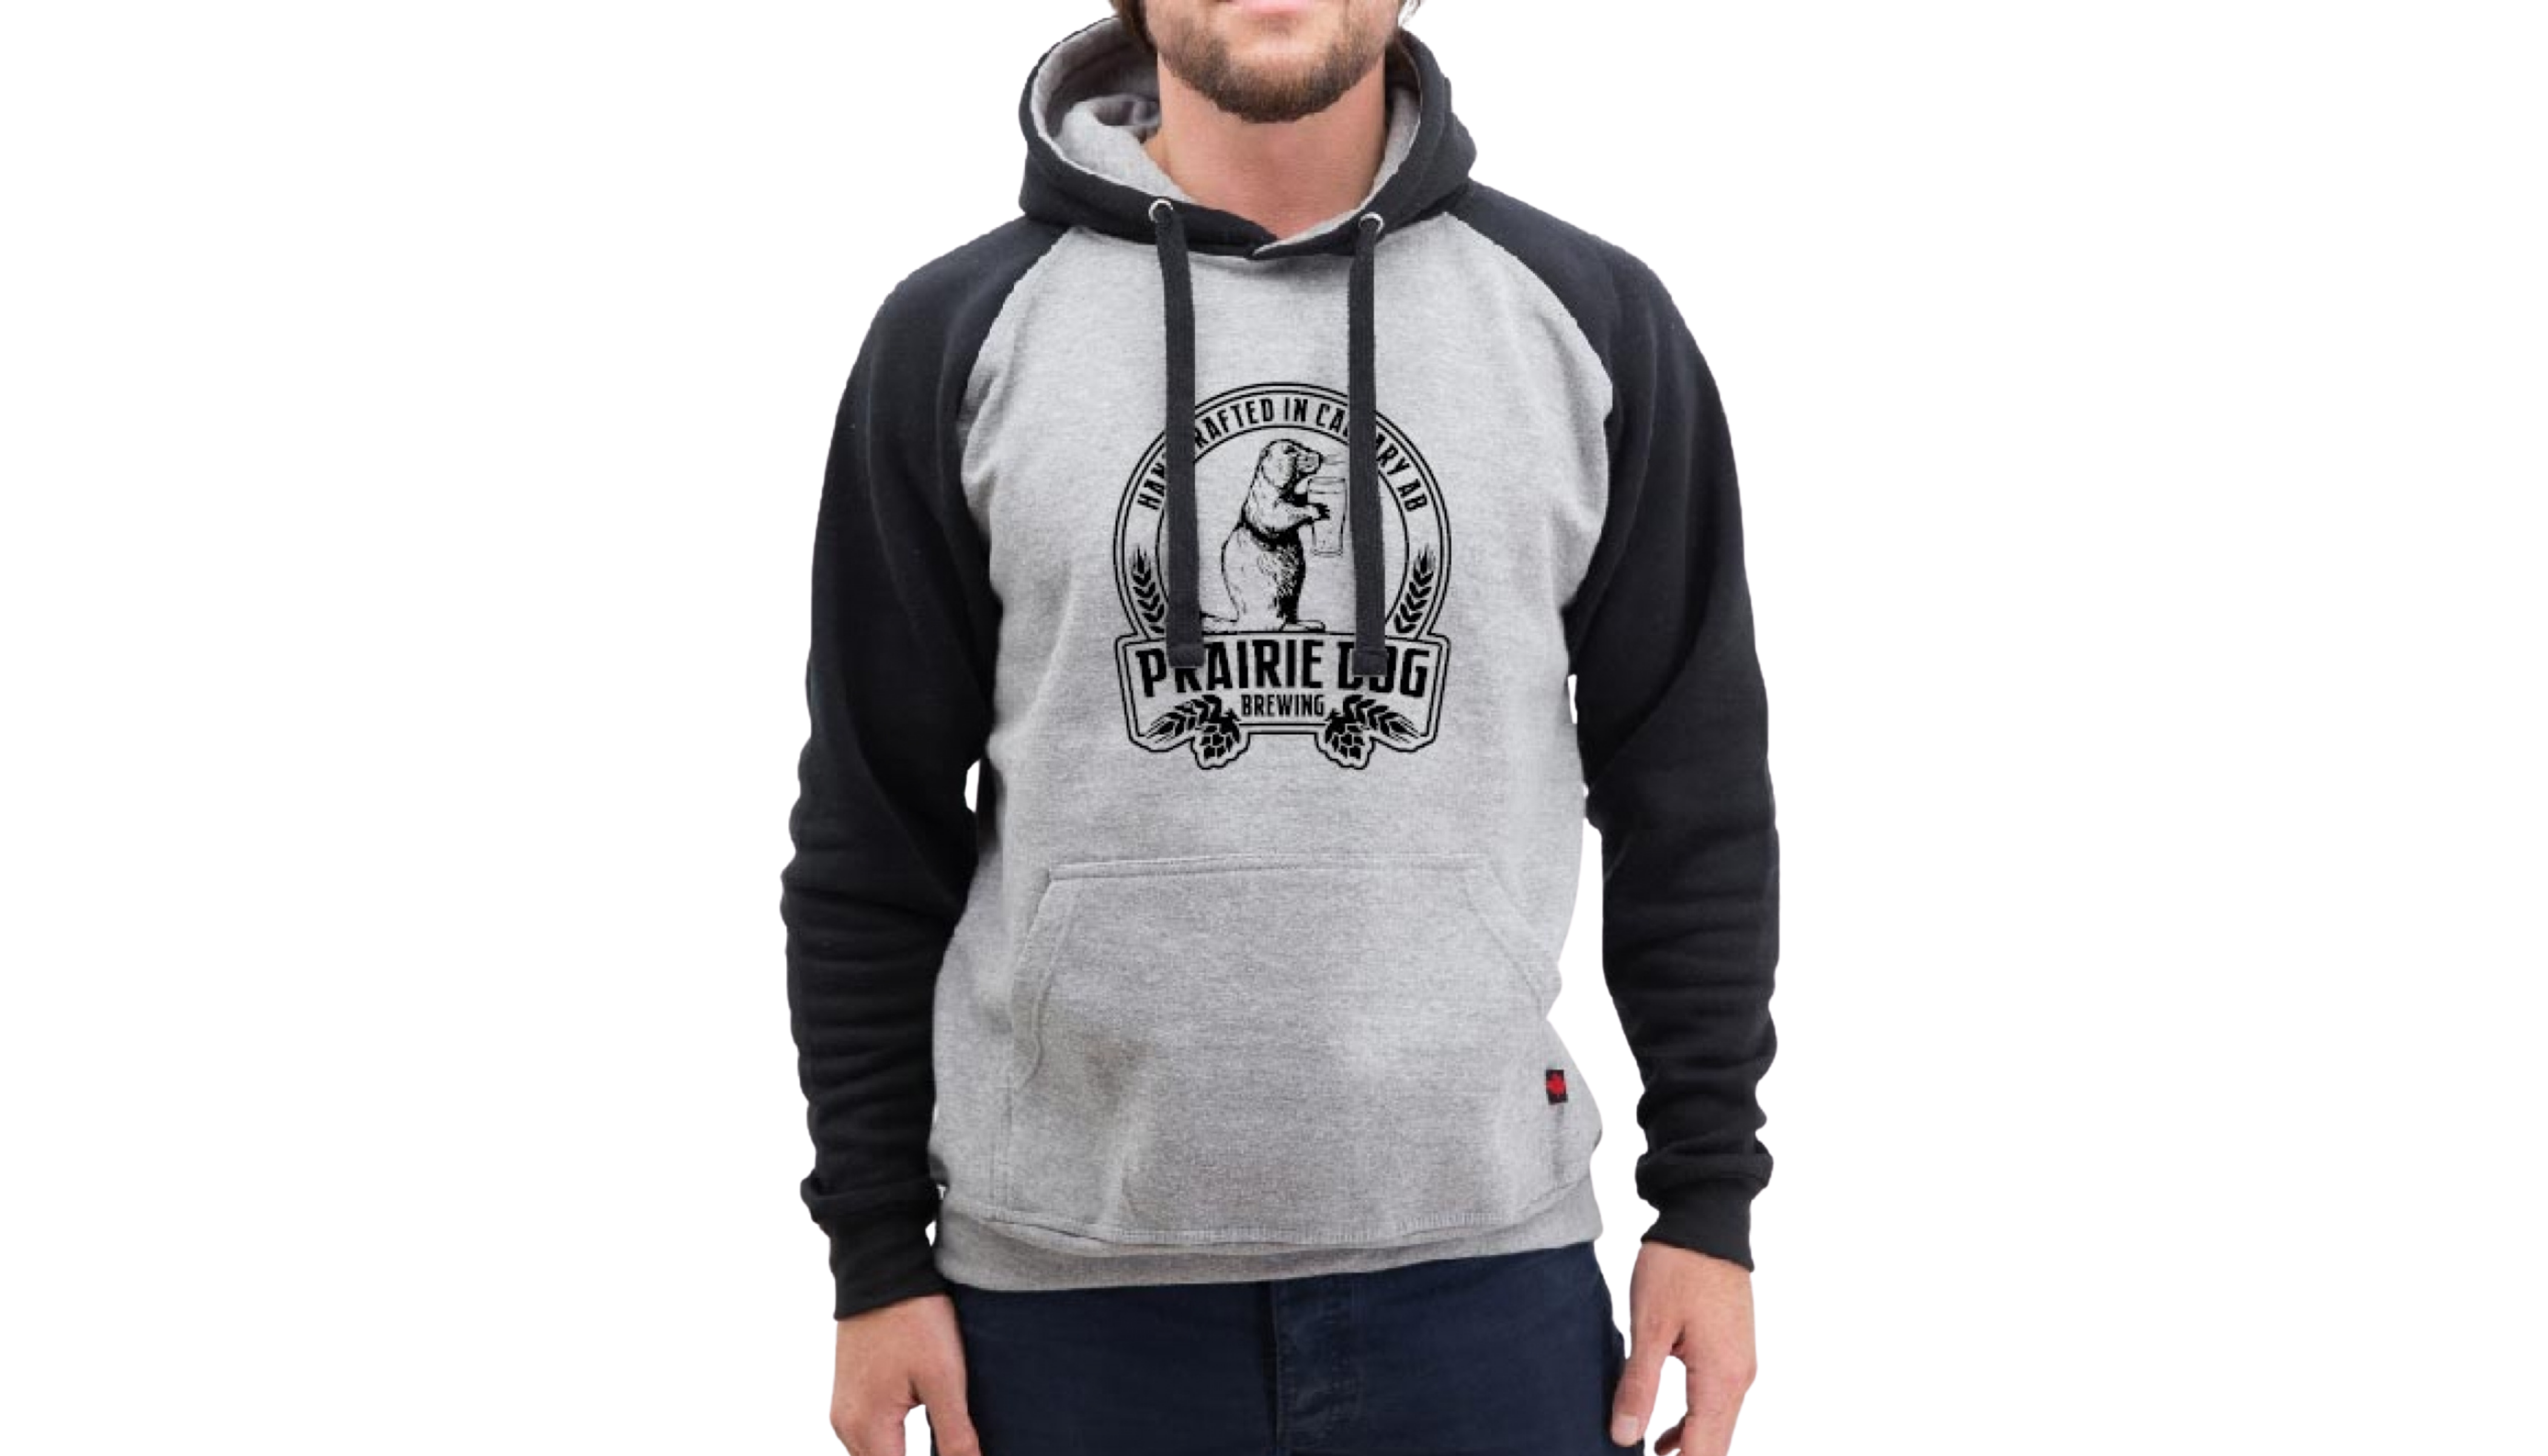 A man wearing a hoodie with black sleeves and a light gray torso with the Prairie Dog Brewing badge in black on the front.